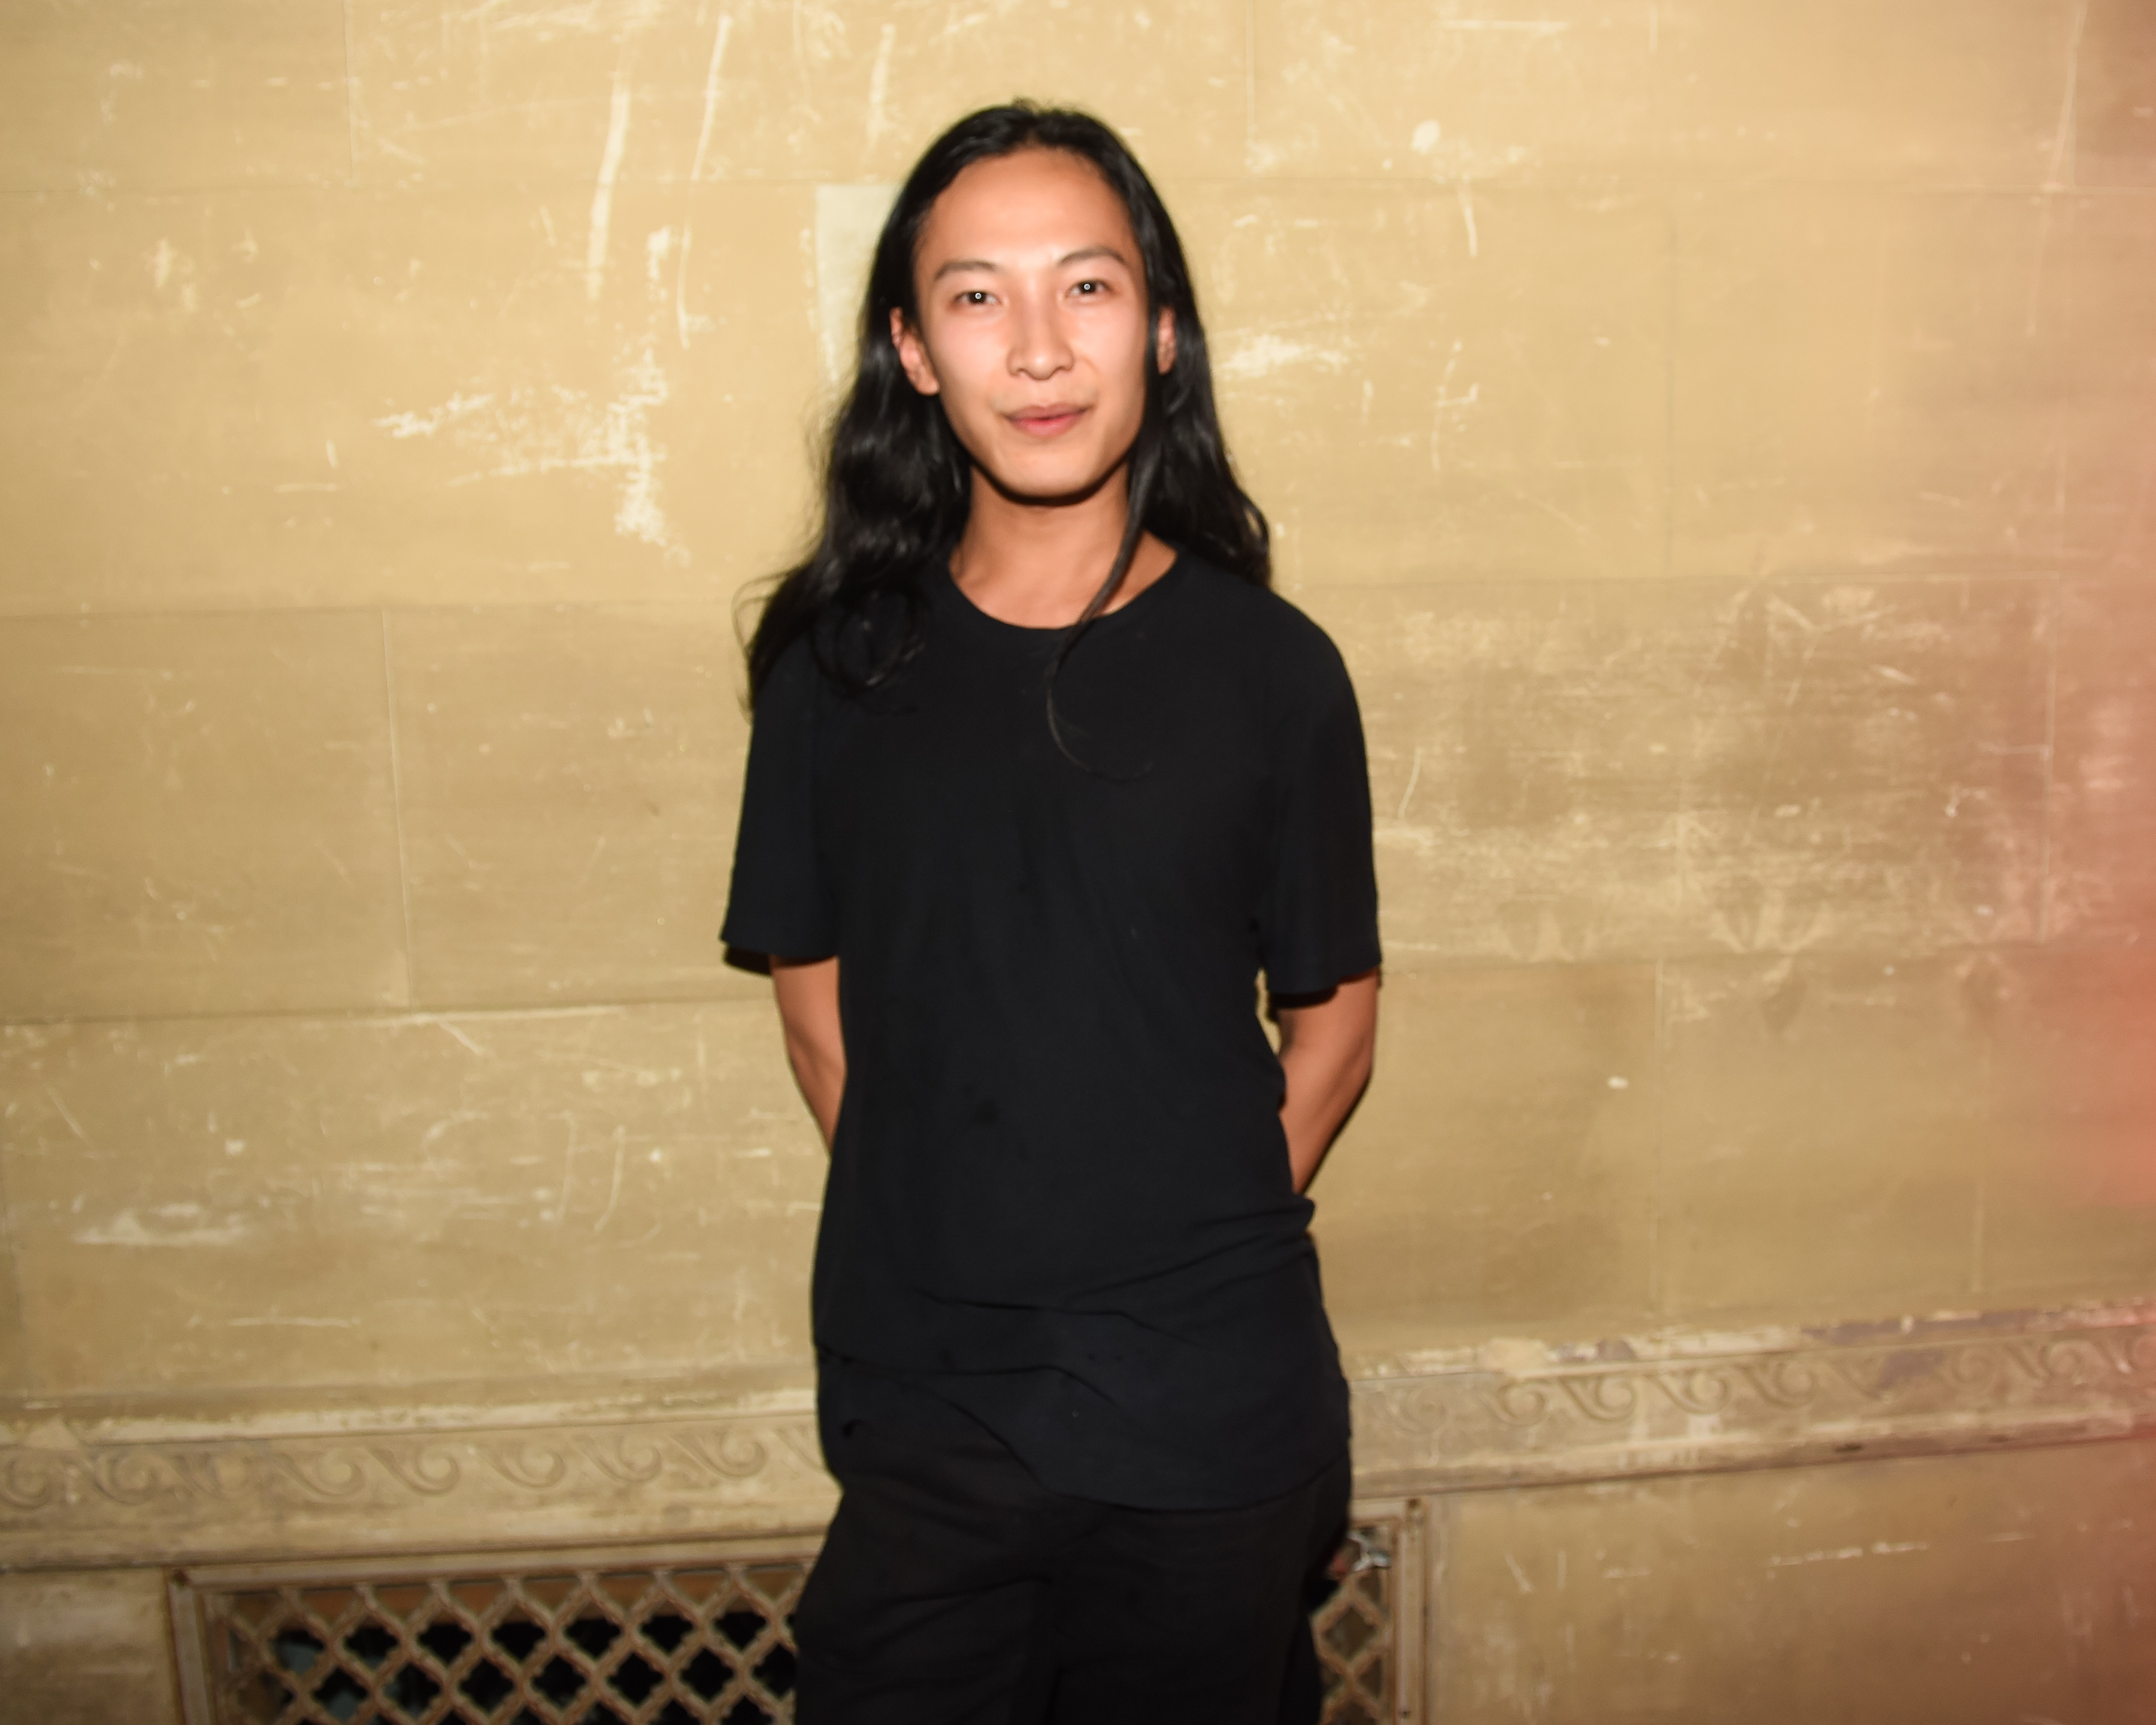 The Daily Roundup: Alexander Wang's Big 10, H&M's New Venture